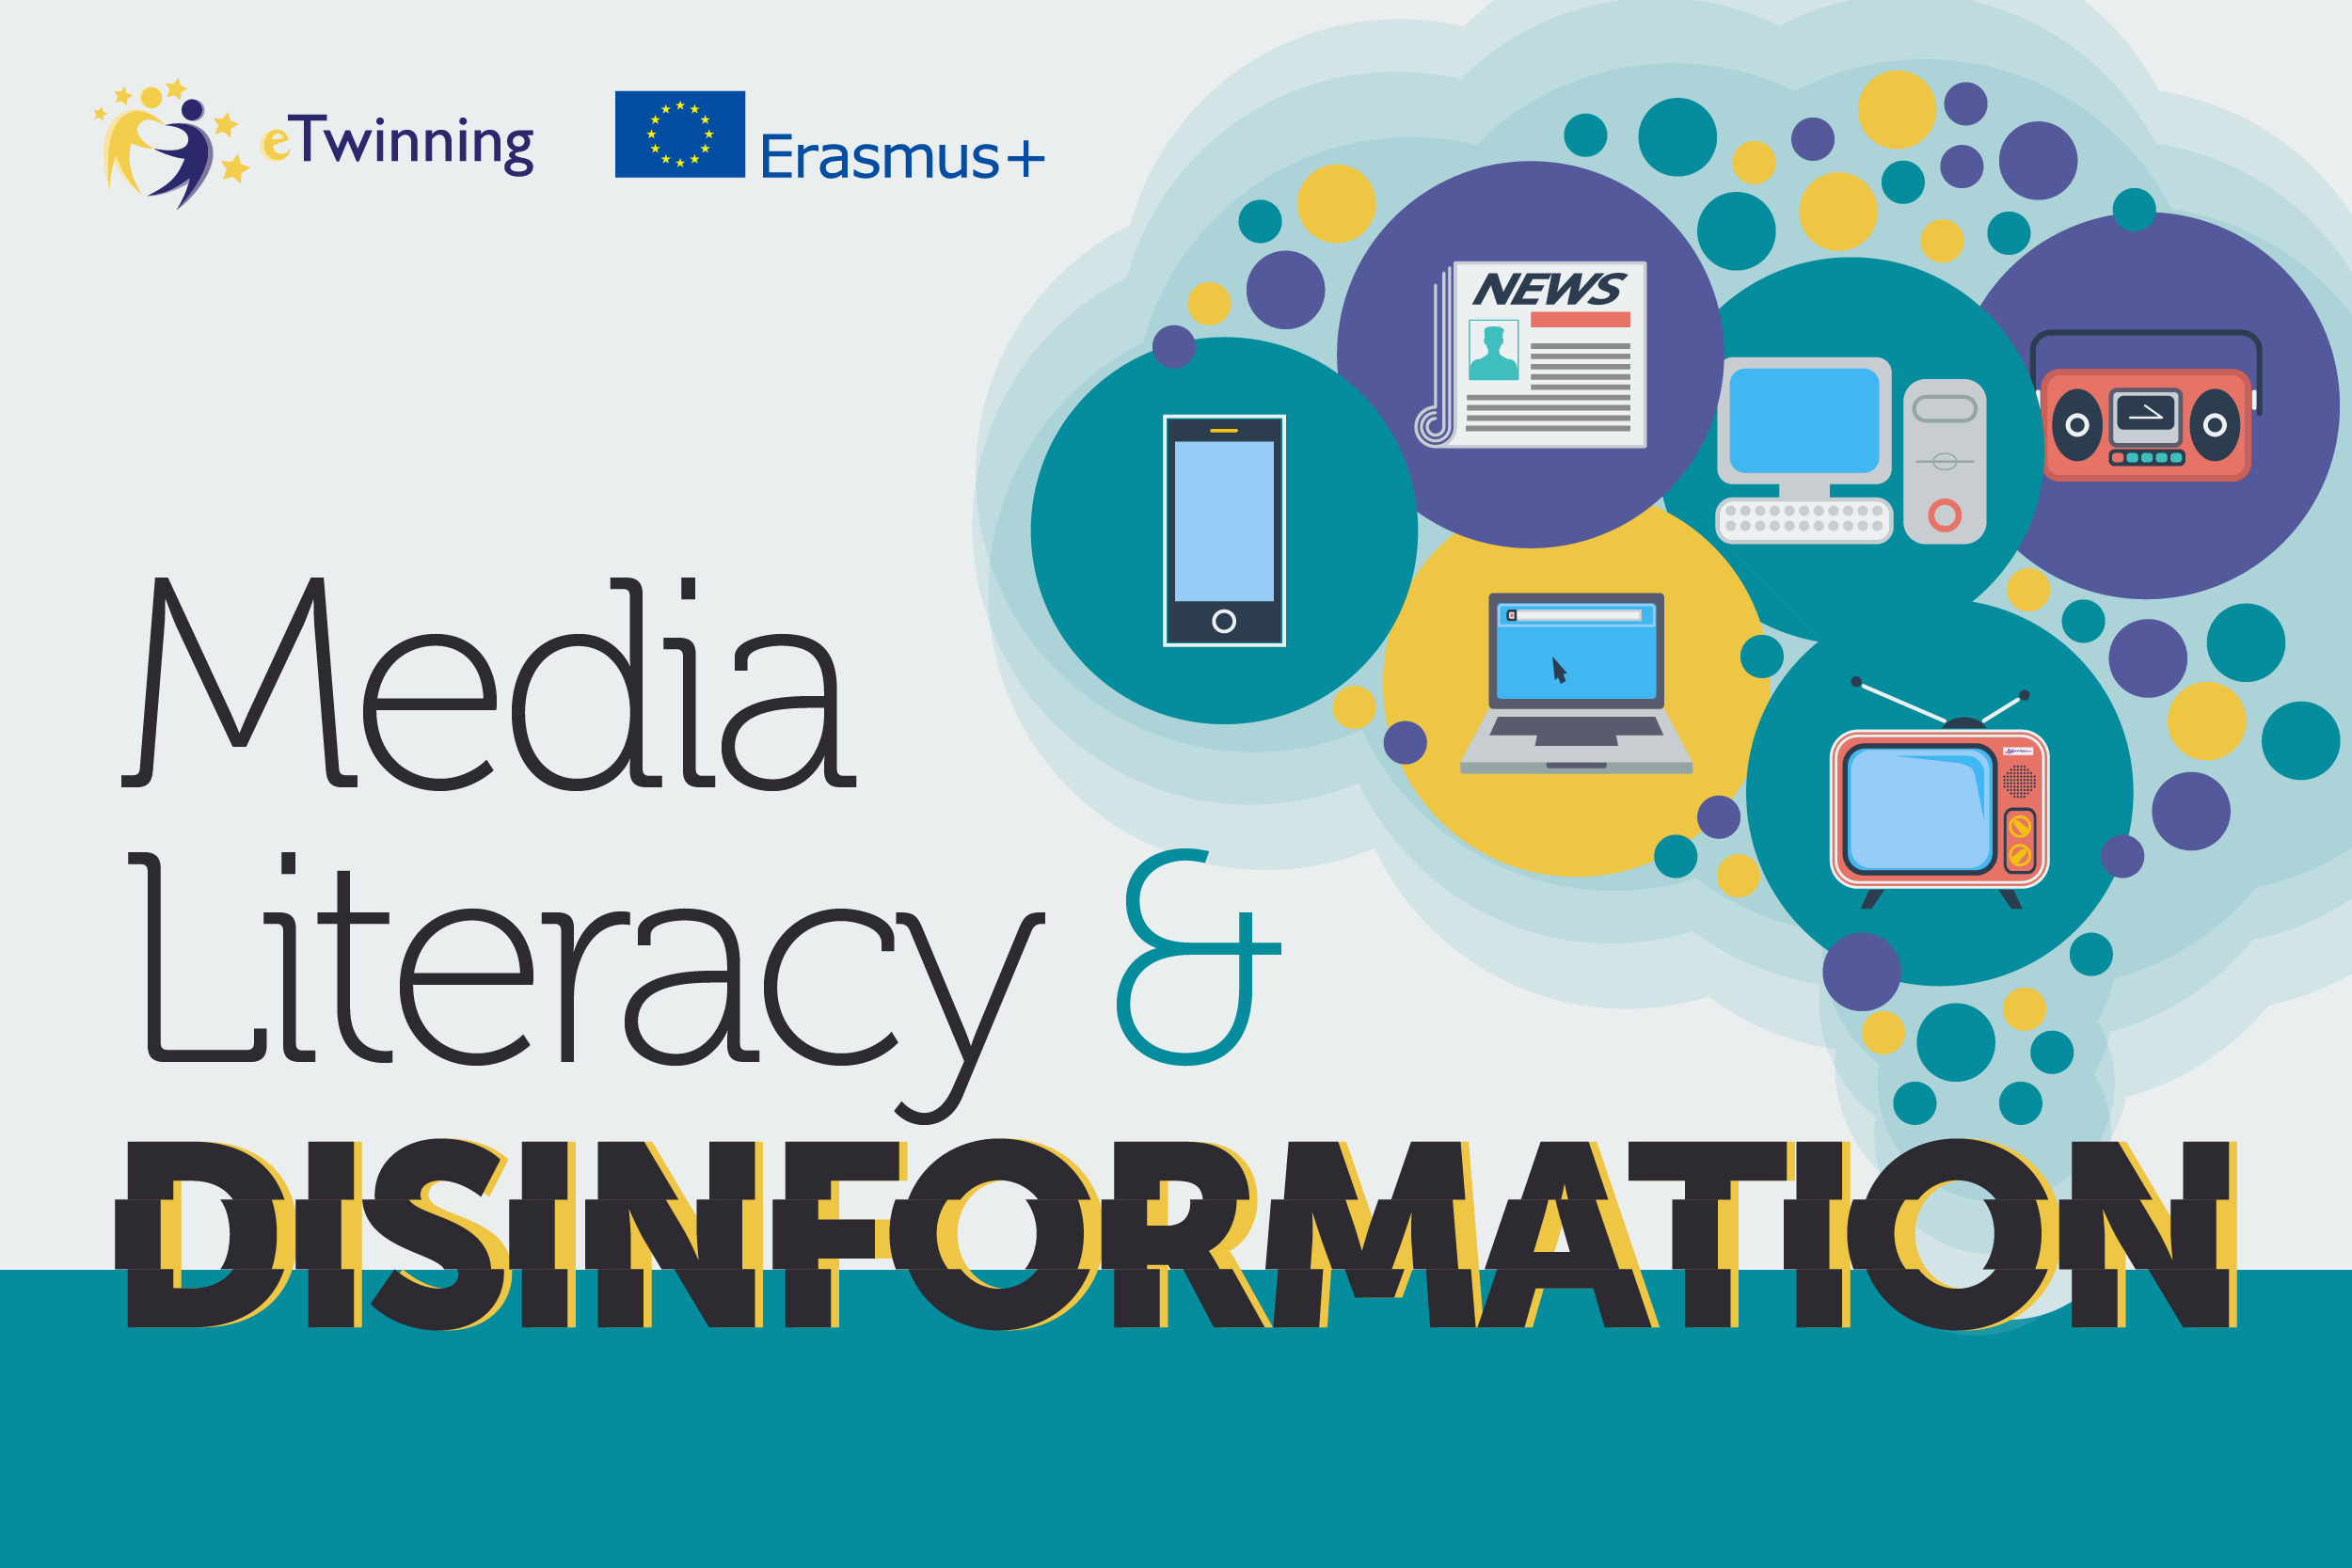 eTwinning "Media Literacy and Disinformation" group